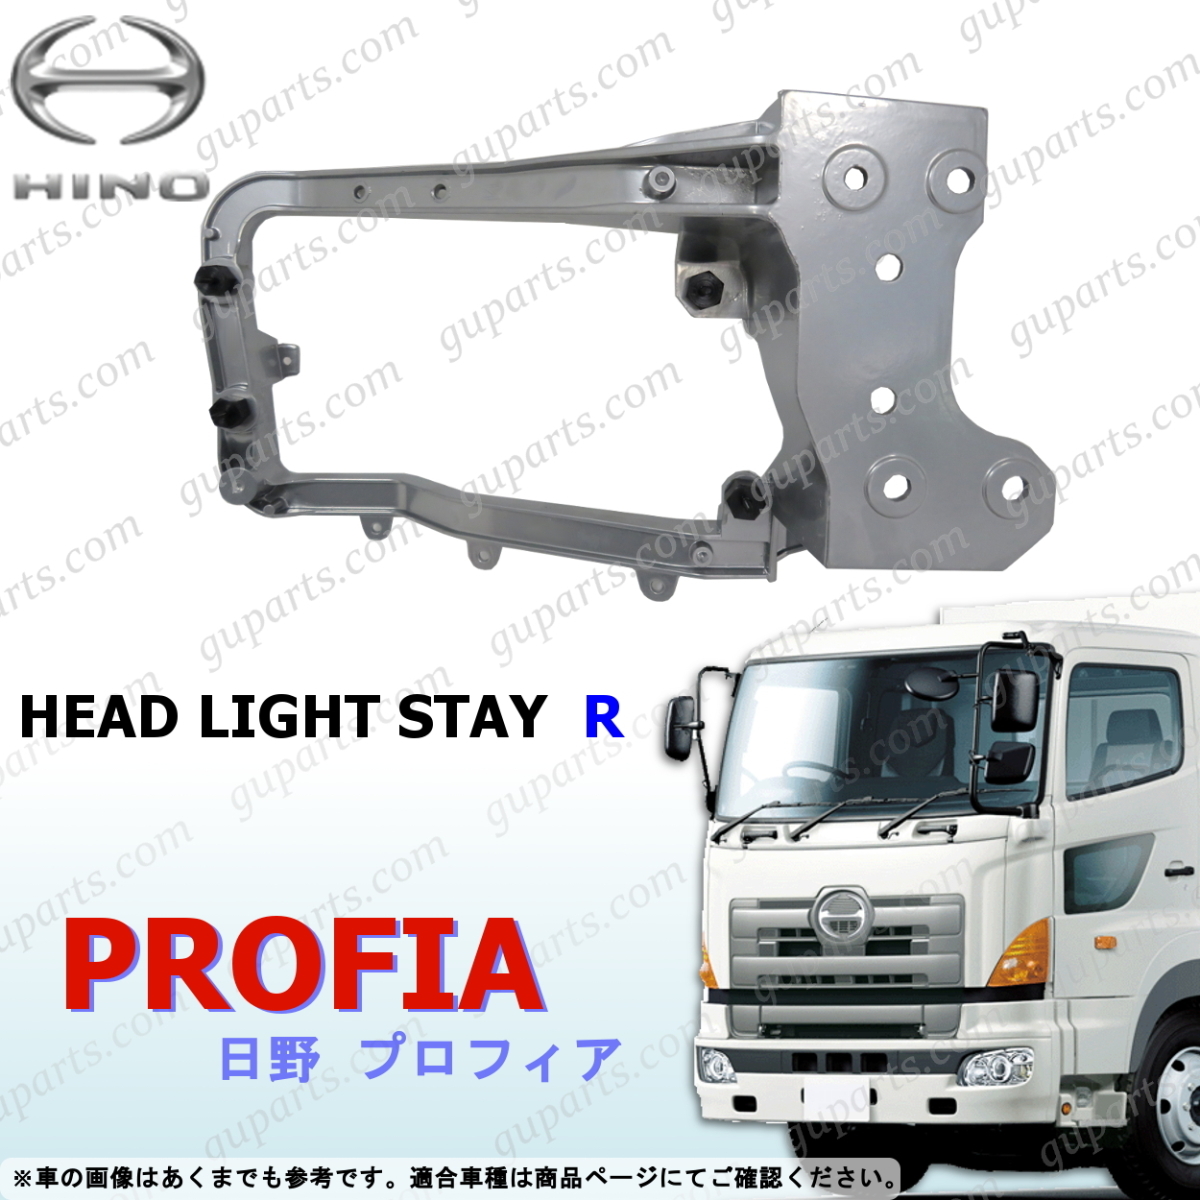 HINO Grand Profia ~H23 right head light stay support 52131-1064 driver`s seat side front bumper light support 